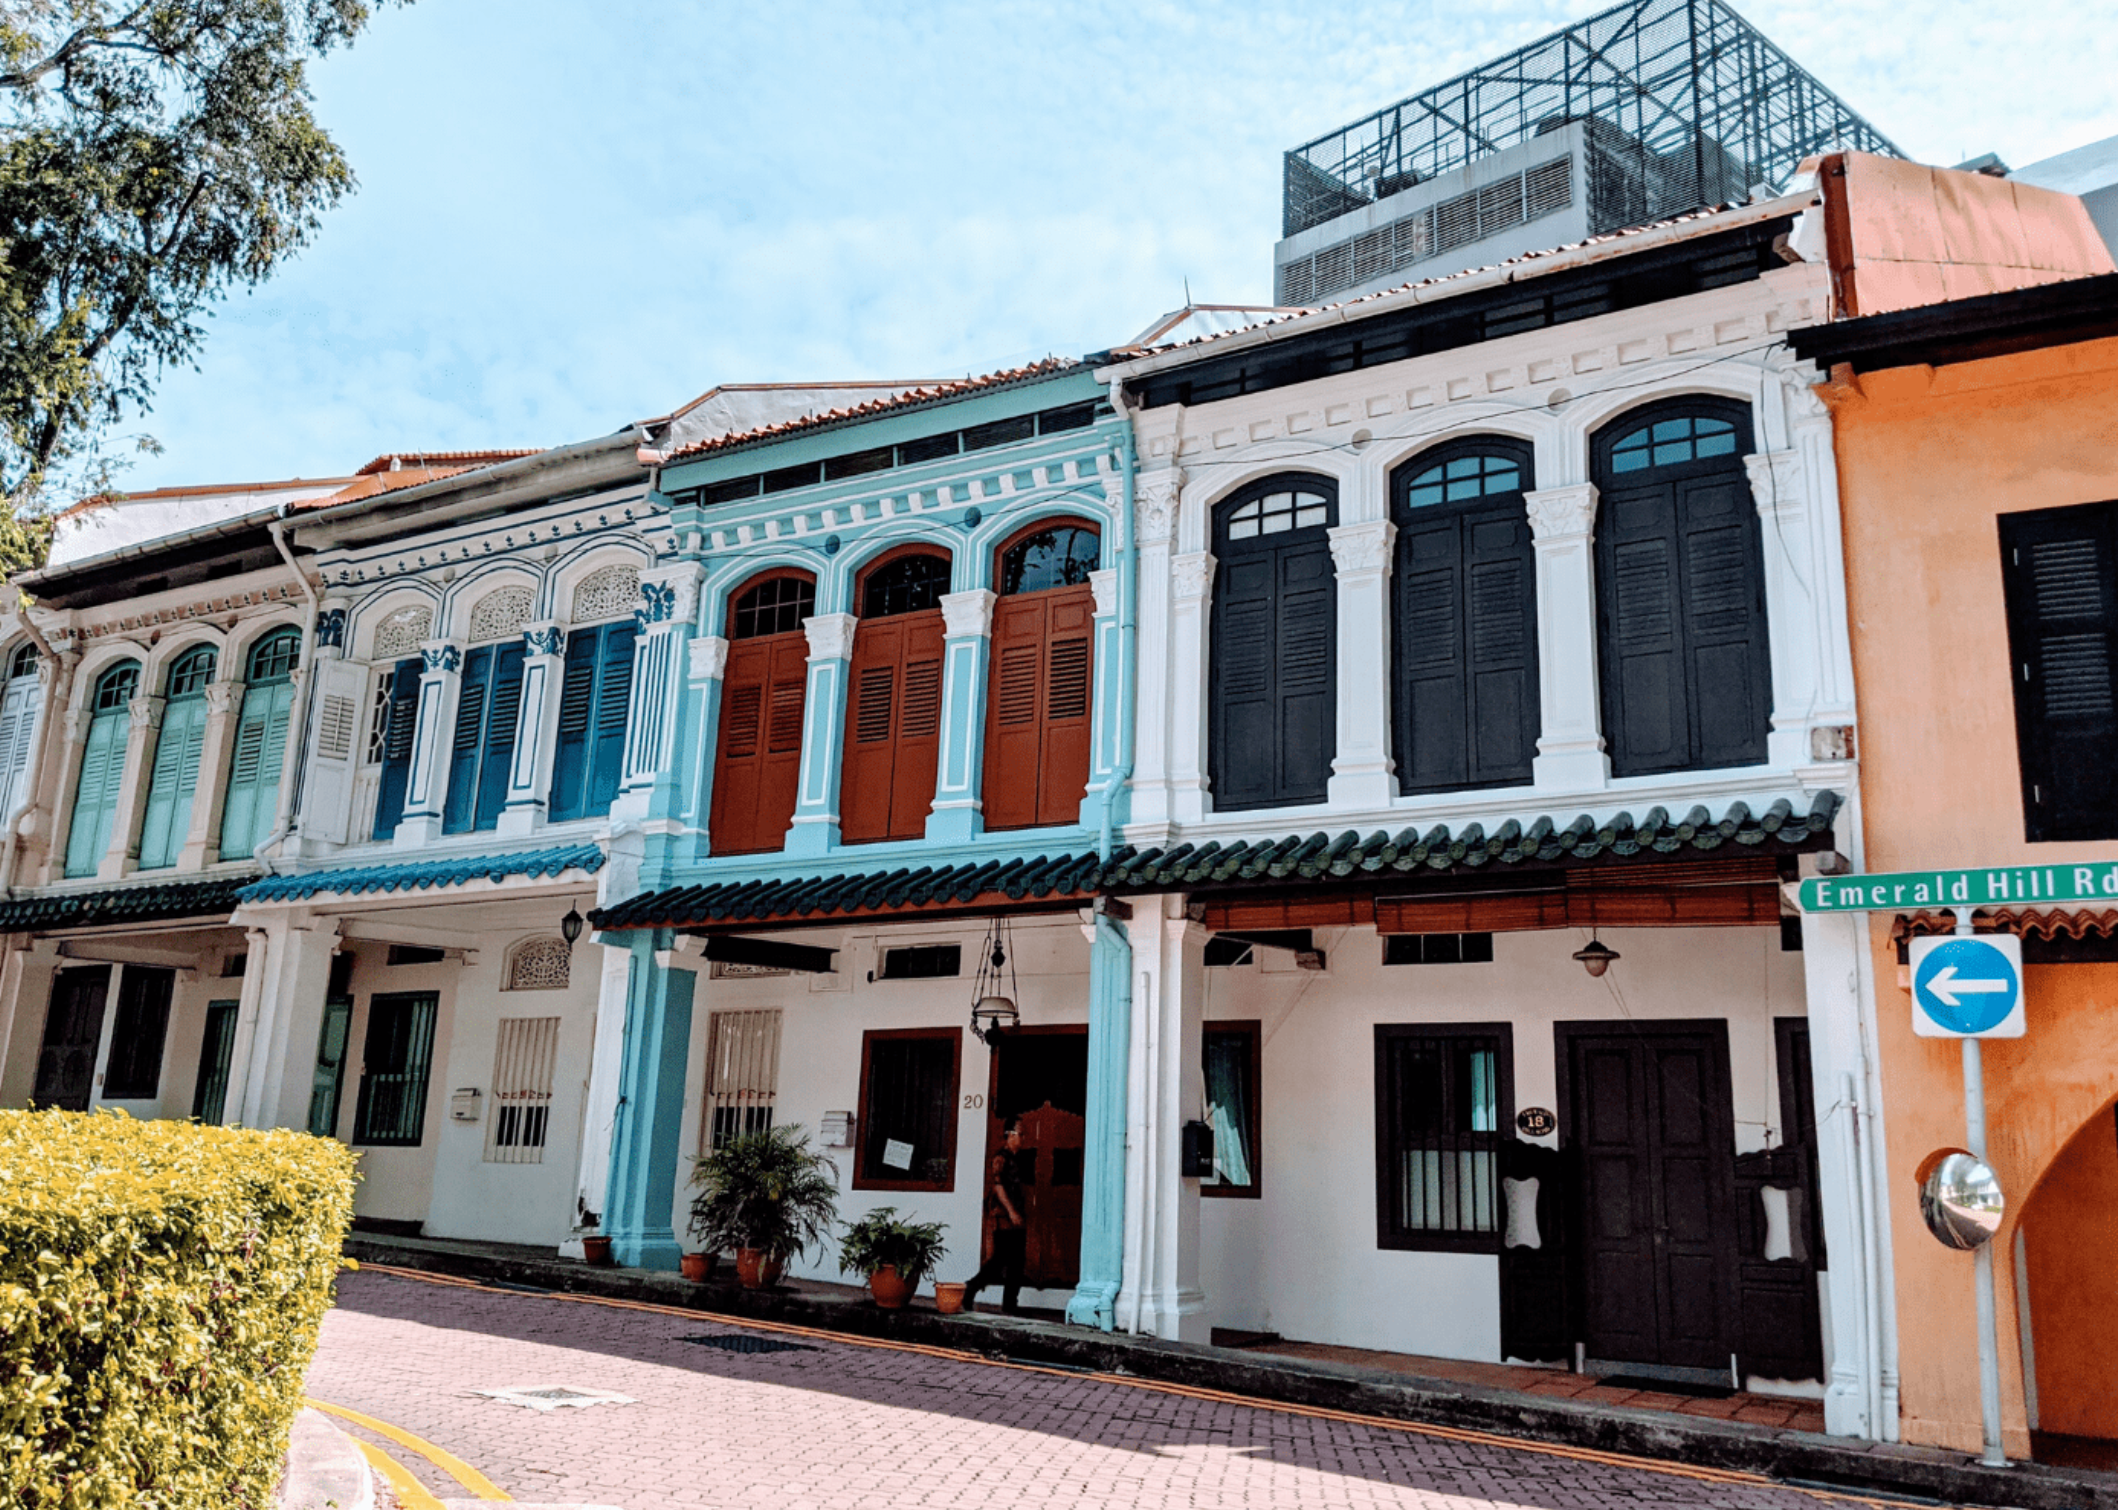 Peranakan Houses in Emerald Hill courtesy Honeycombers, Amelia Ang.